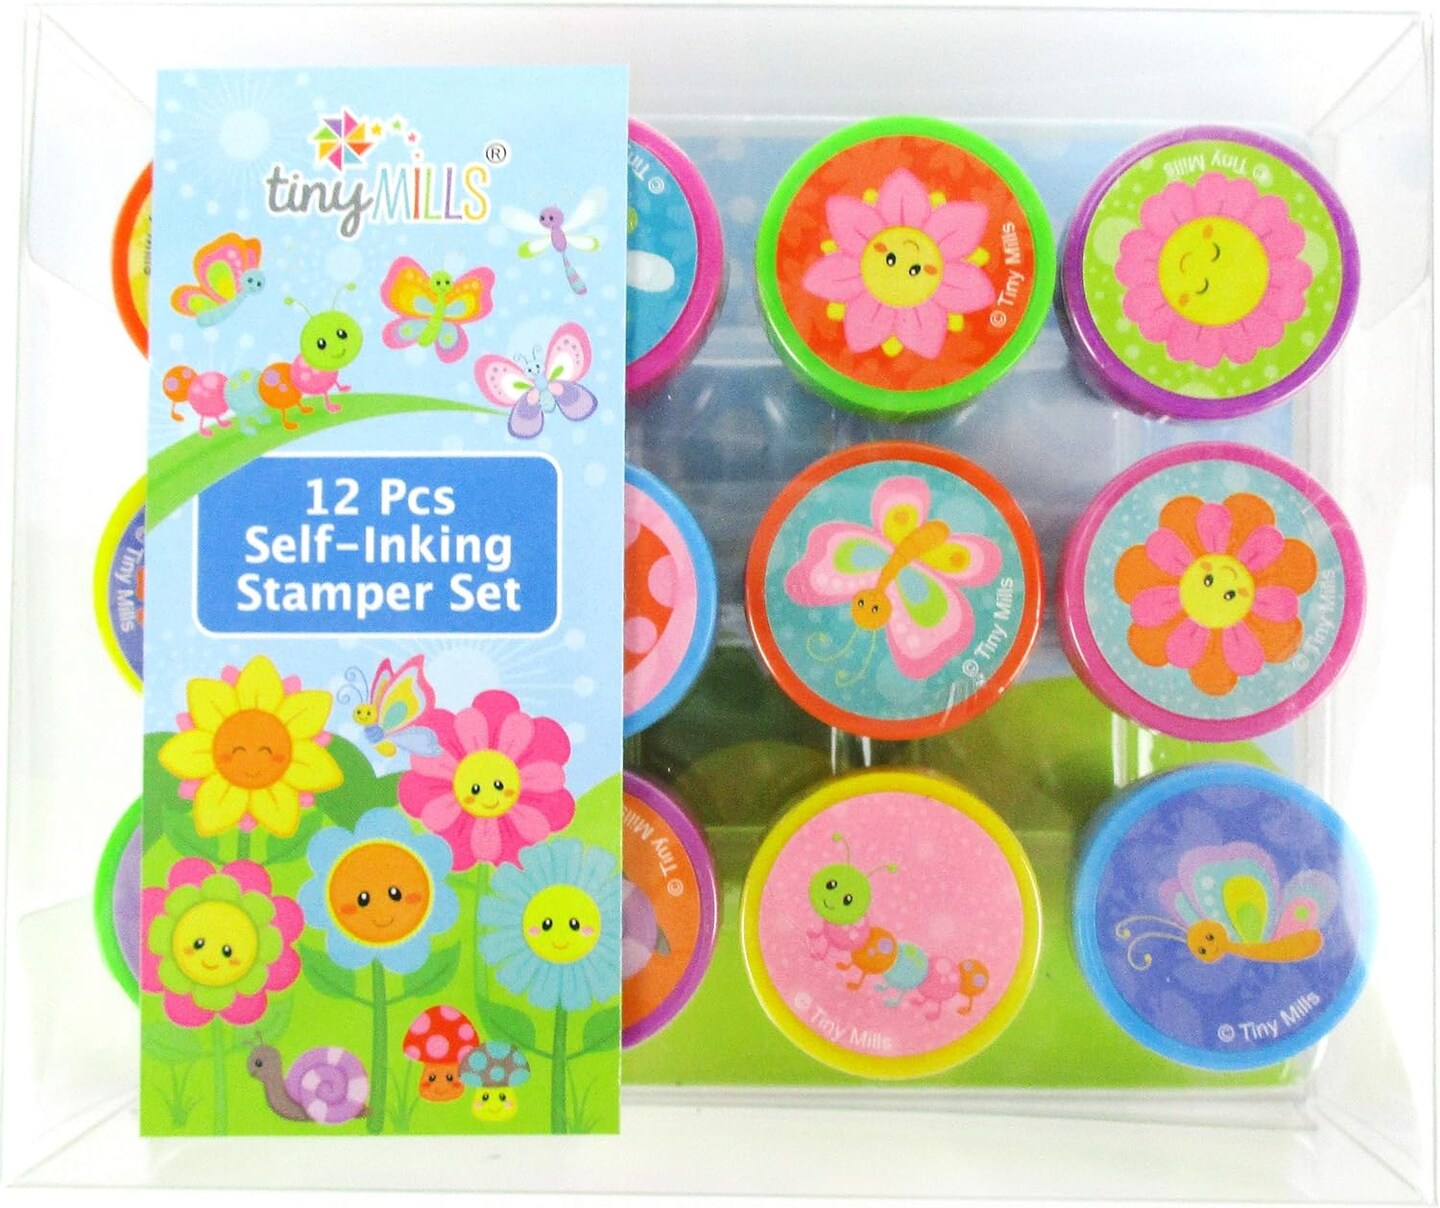 TINYMILLS 12 Pcs Spring Flowers Butterfly Stamp Kit